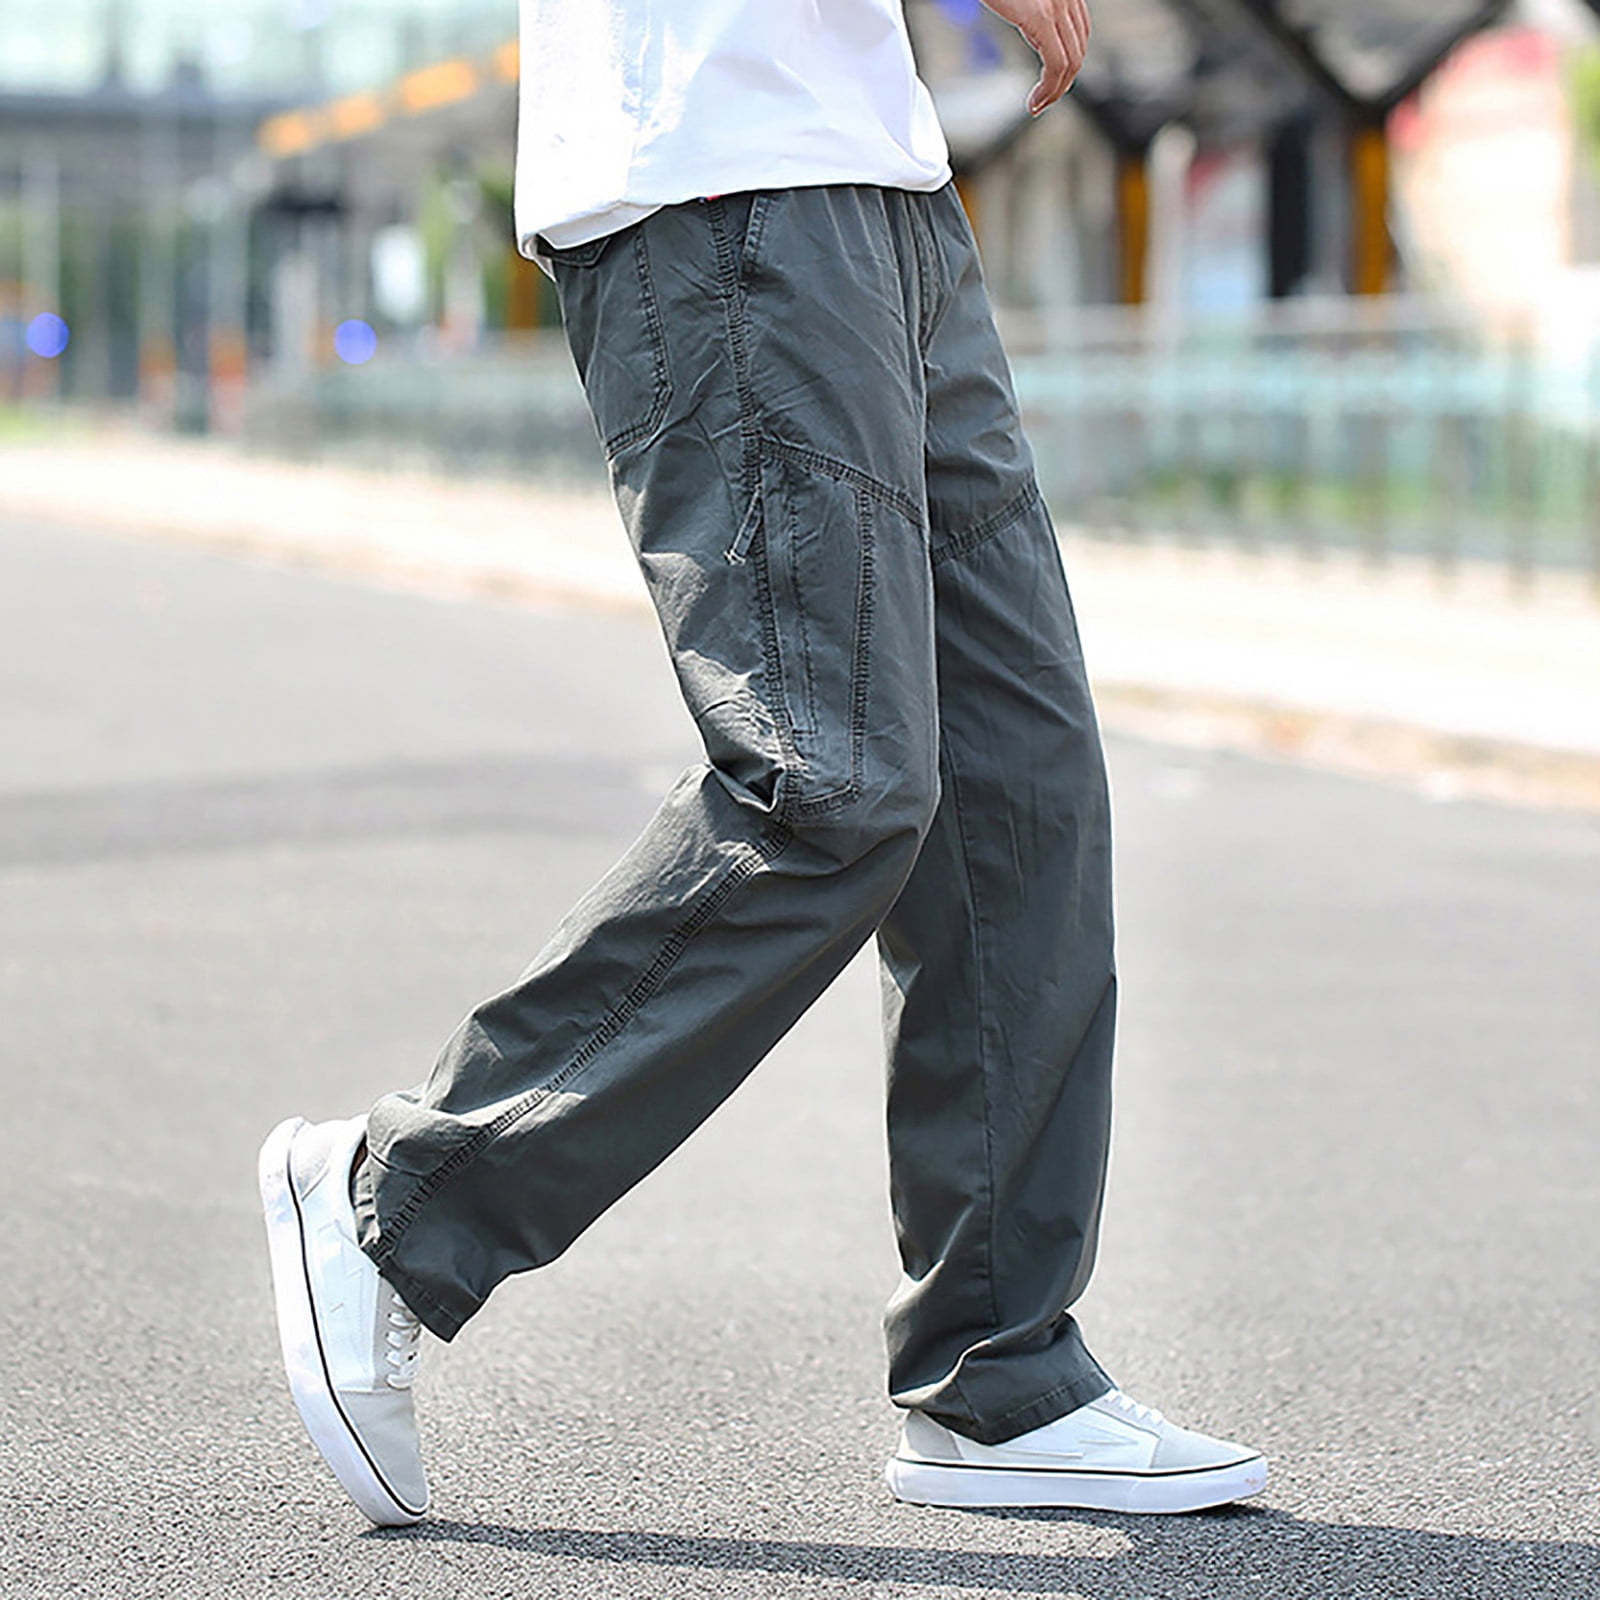 7 Best Work Pants for Men in 2023: Picks for Every Workplace